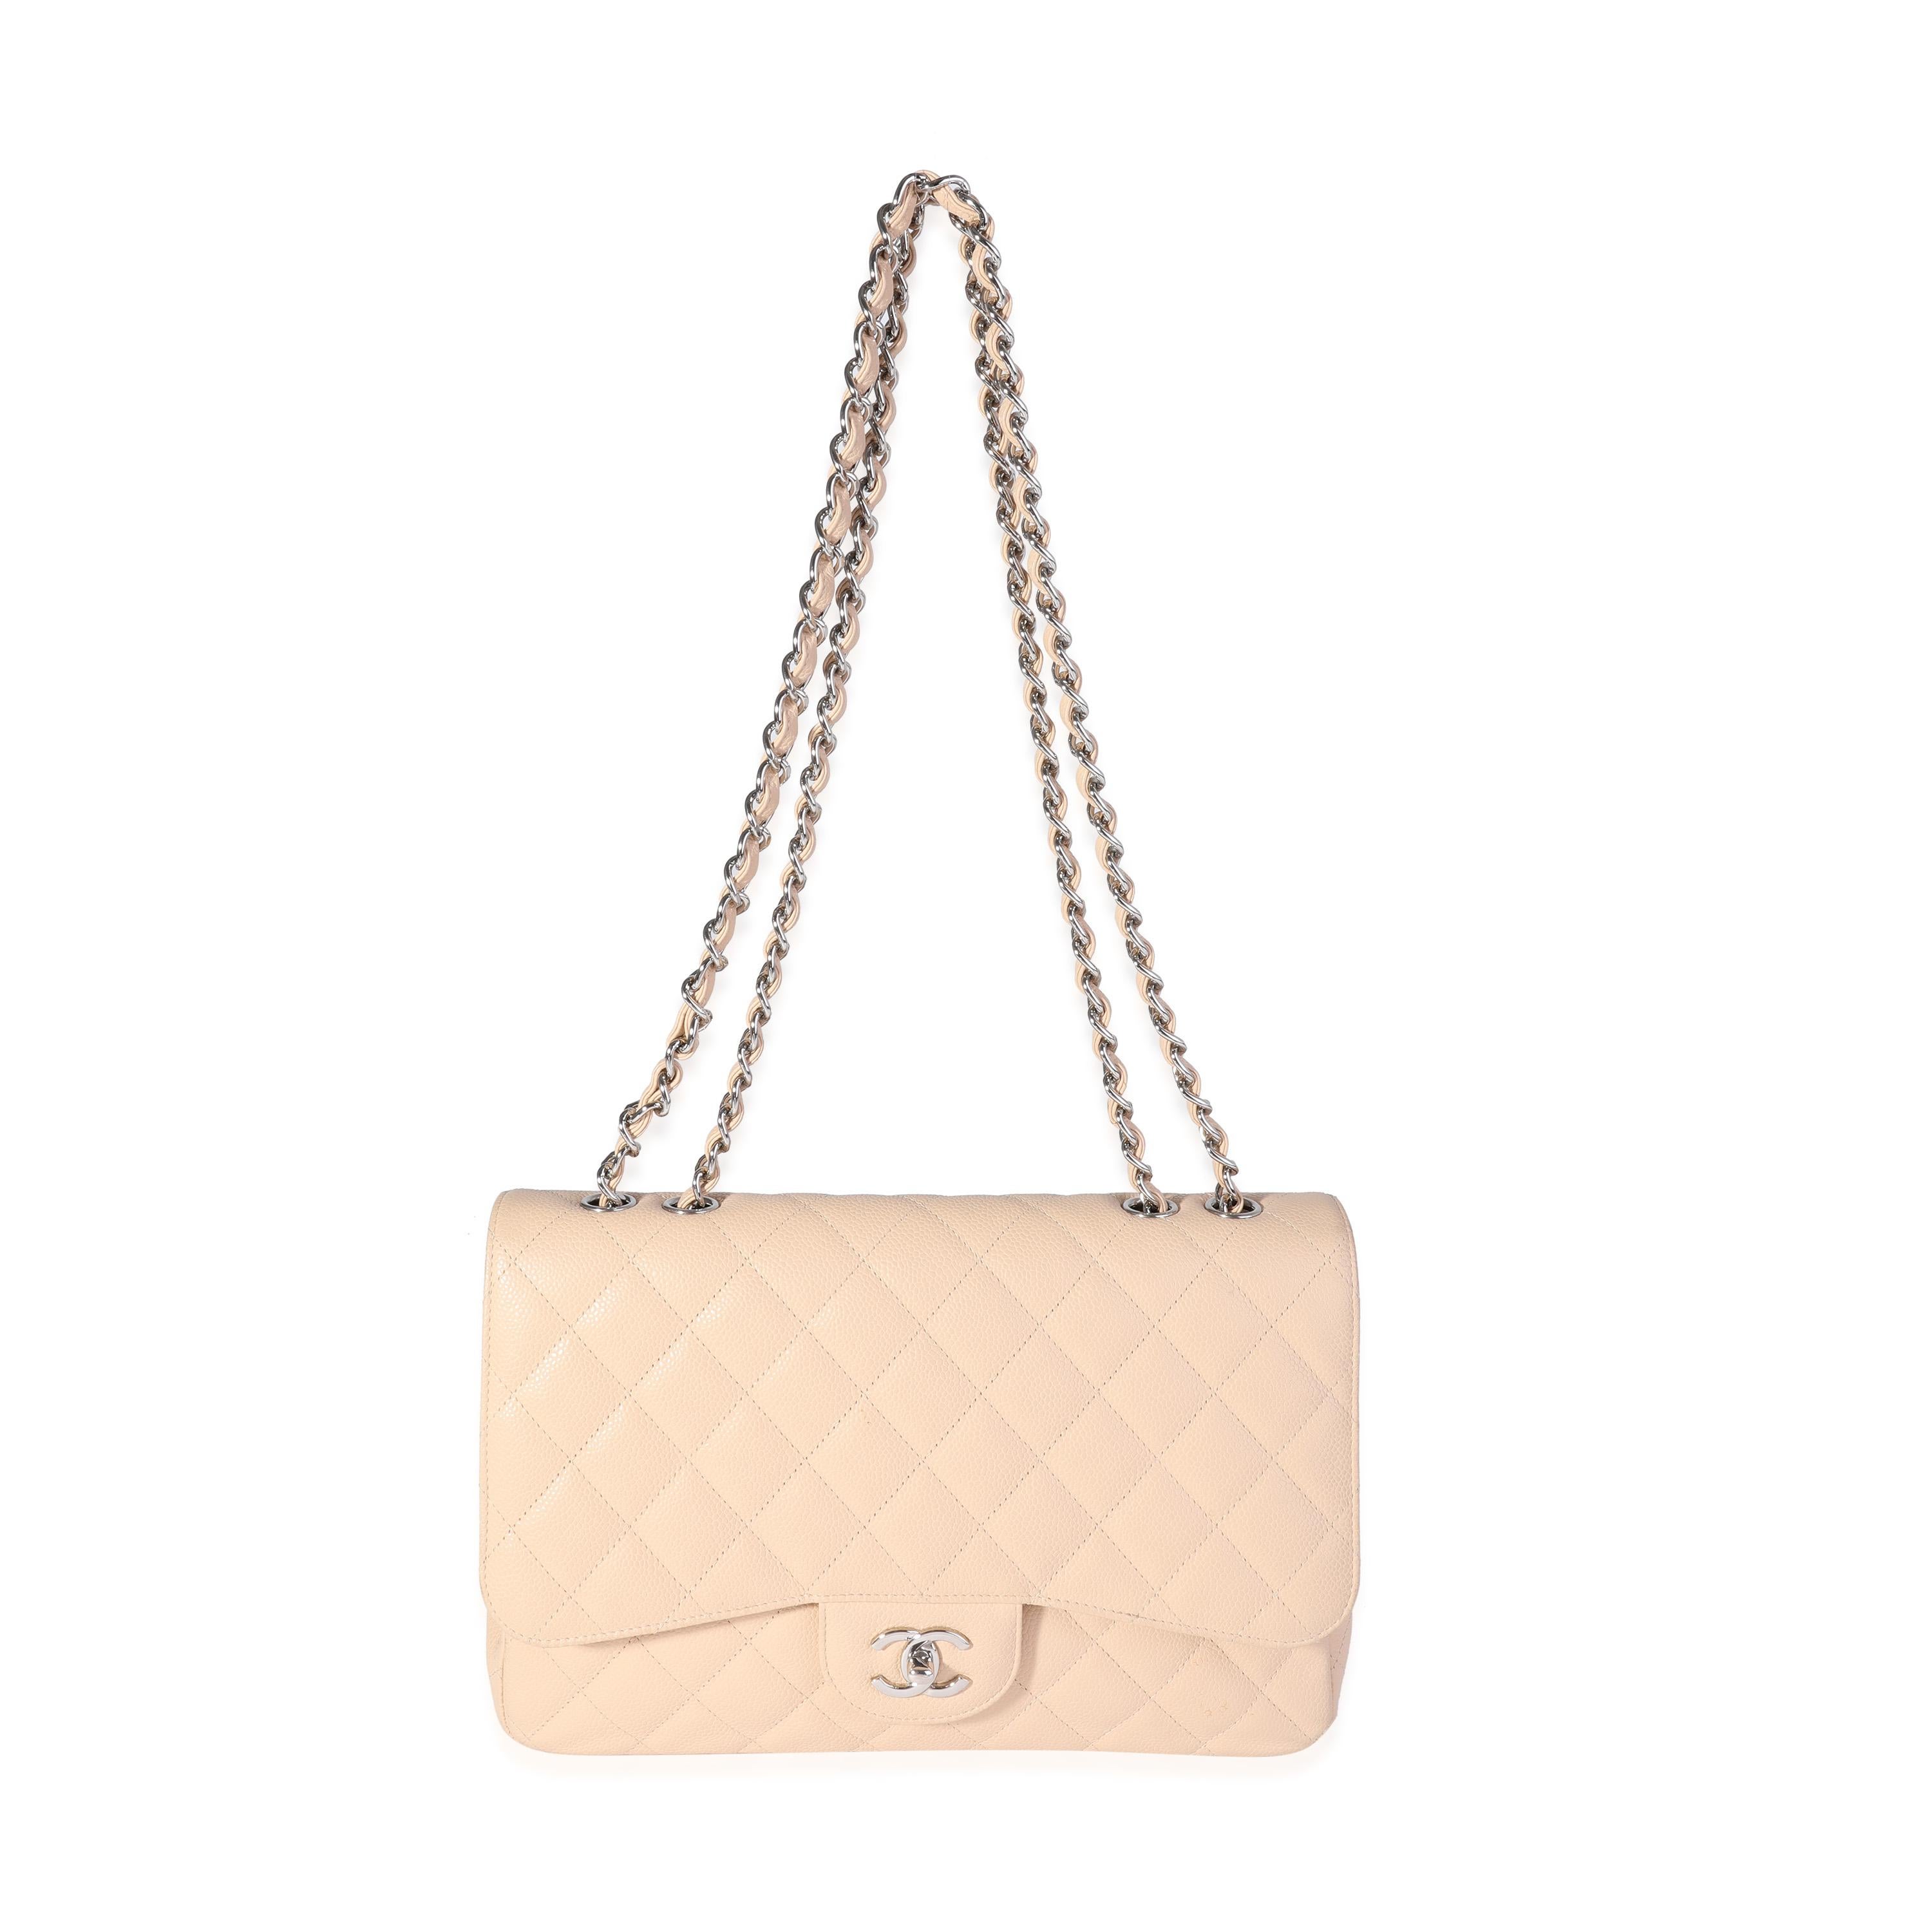 Listing Title: Chanel Beige Quilted Caviar Jumbo Classic Single Flap Bag
SKU: 120634
MSRP: 9500.00
Condition: Pre-owned (3000)
Handbag Condition: Good
Condition Comments: Good Condition. Scuffing throughout exterior and corners. Light scratching to